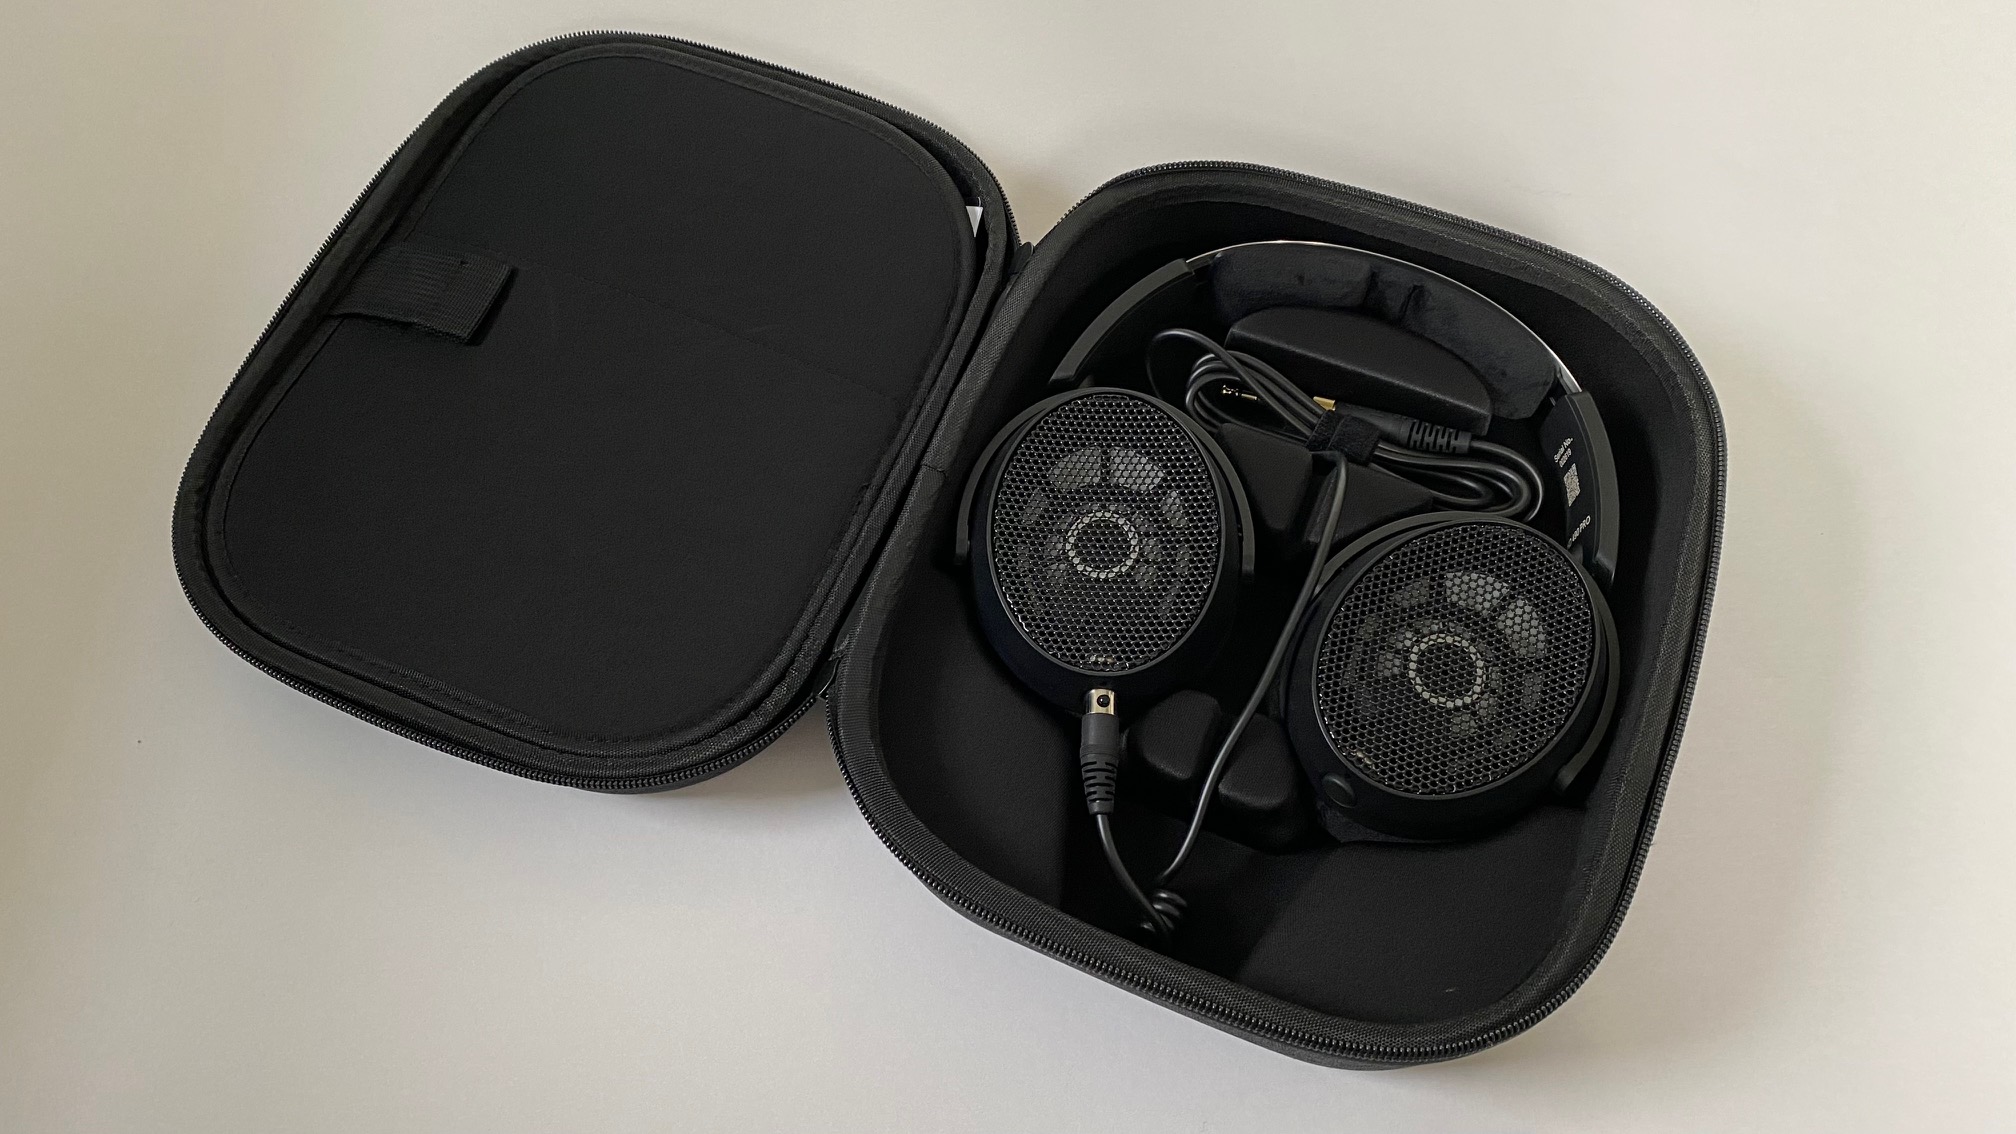 The 'Plus' edition of the Sennheiser HD 490 Pro Headphones come with accessories including a case, second cable, and a second headband cushion.